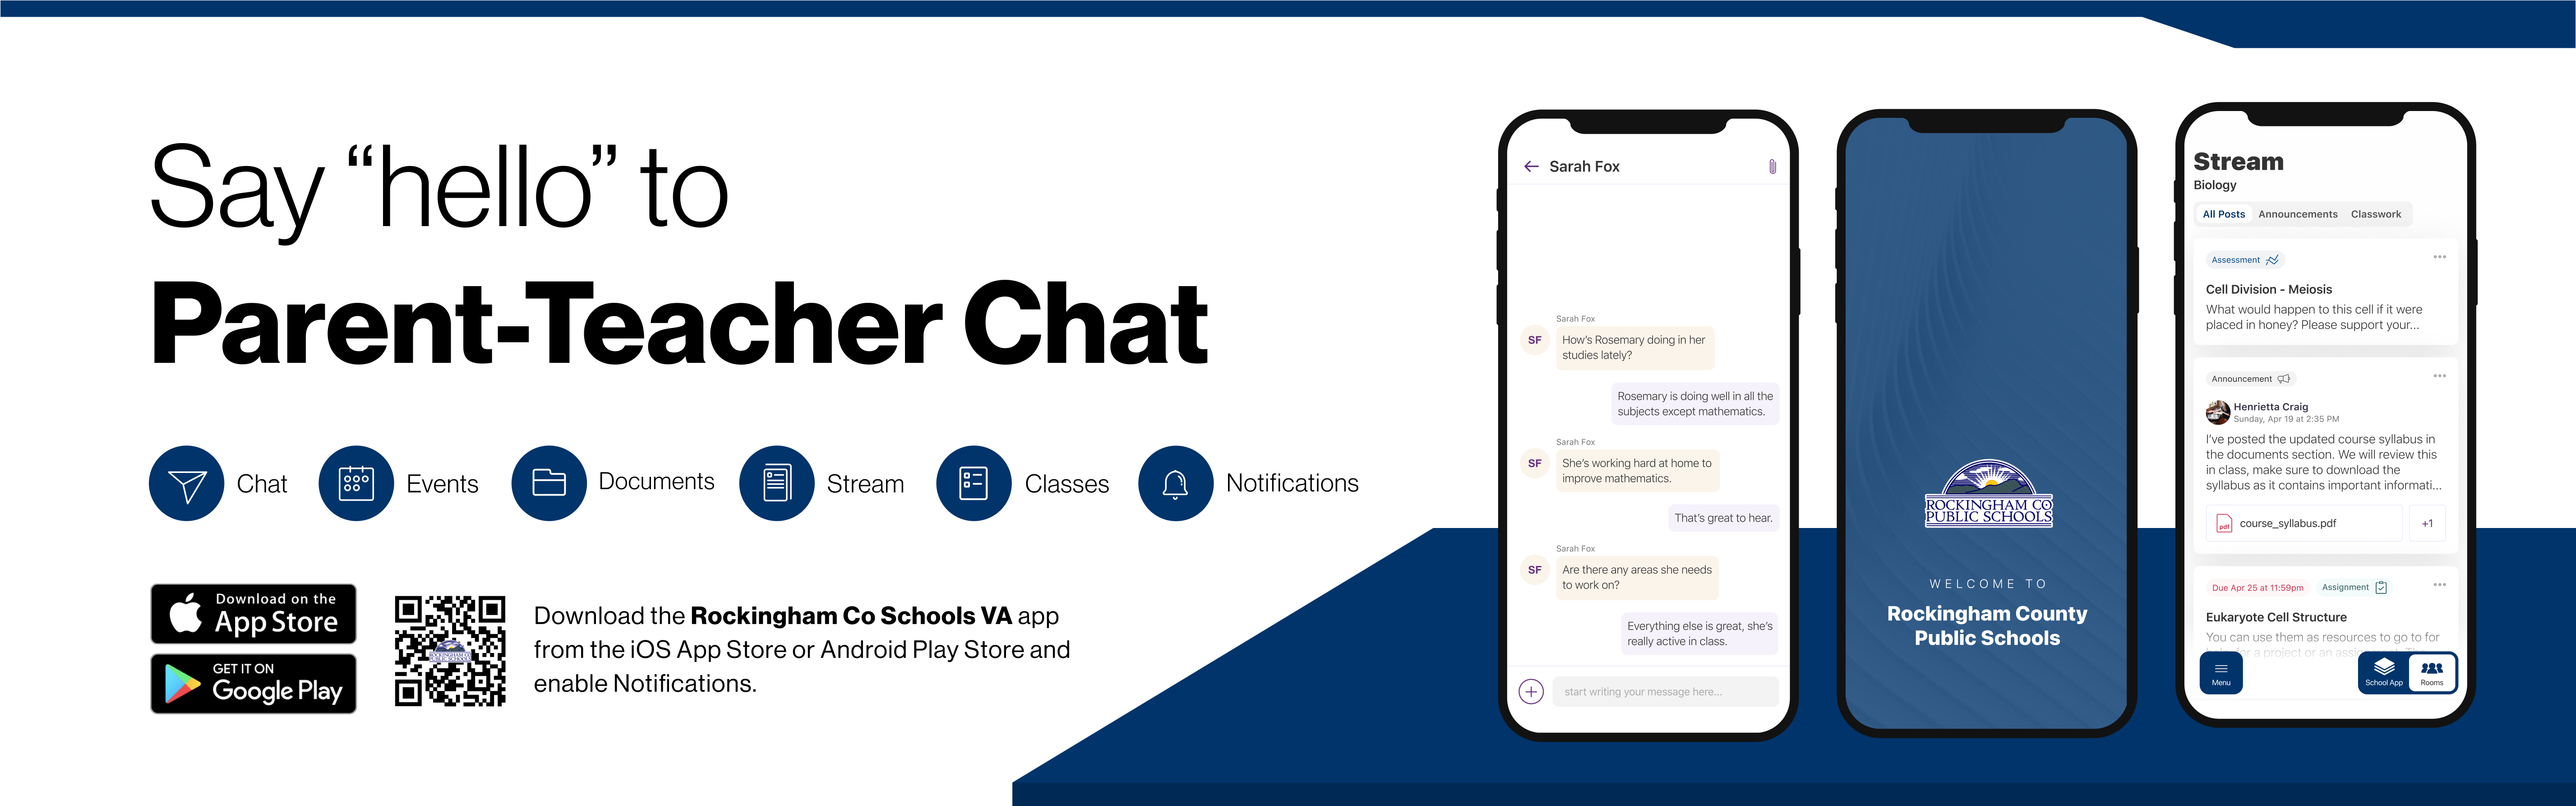 Say hello to Parent Teacher Chat in the Rockingham County Public Schools App